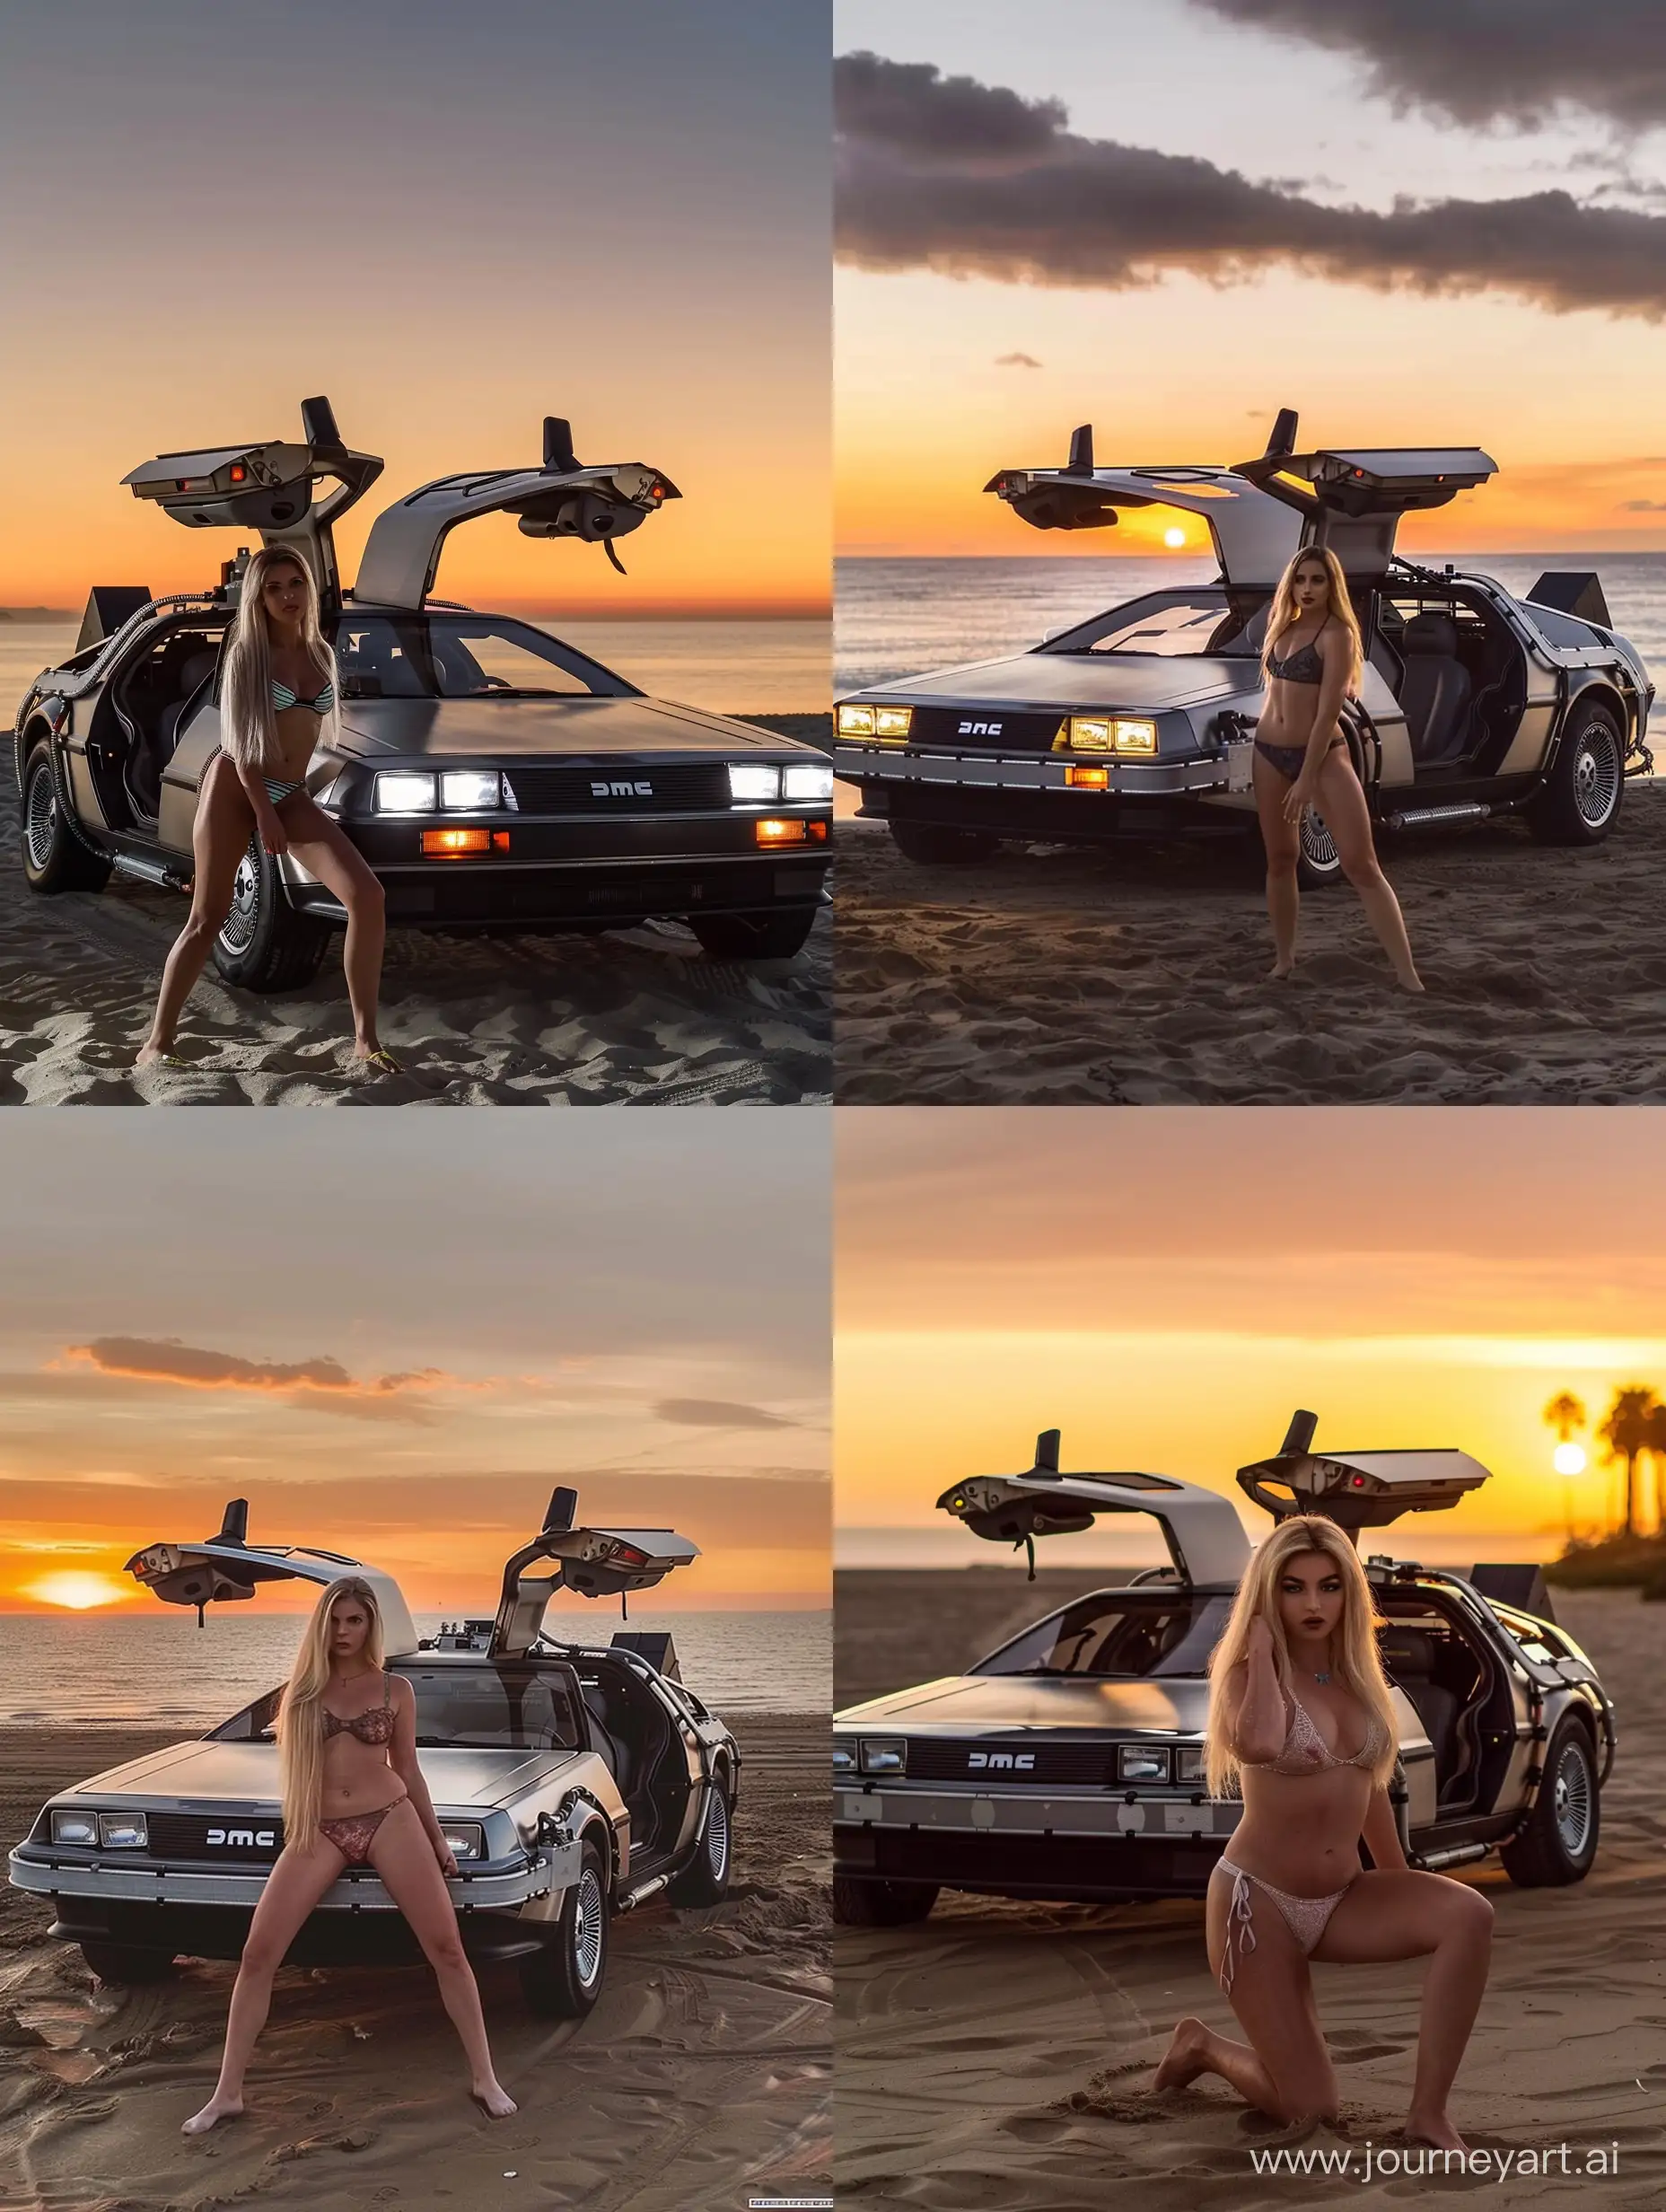 Blonde in a swimsuit posing with the Back to the Future delorean on a beach at sunset.